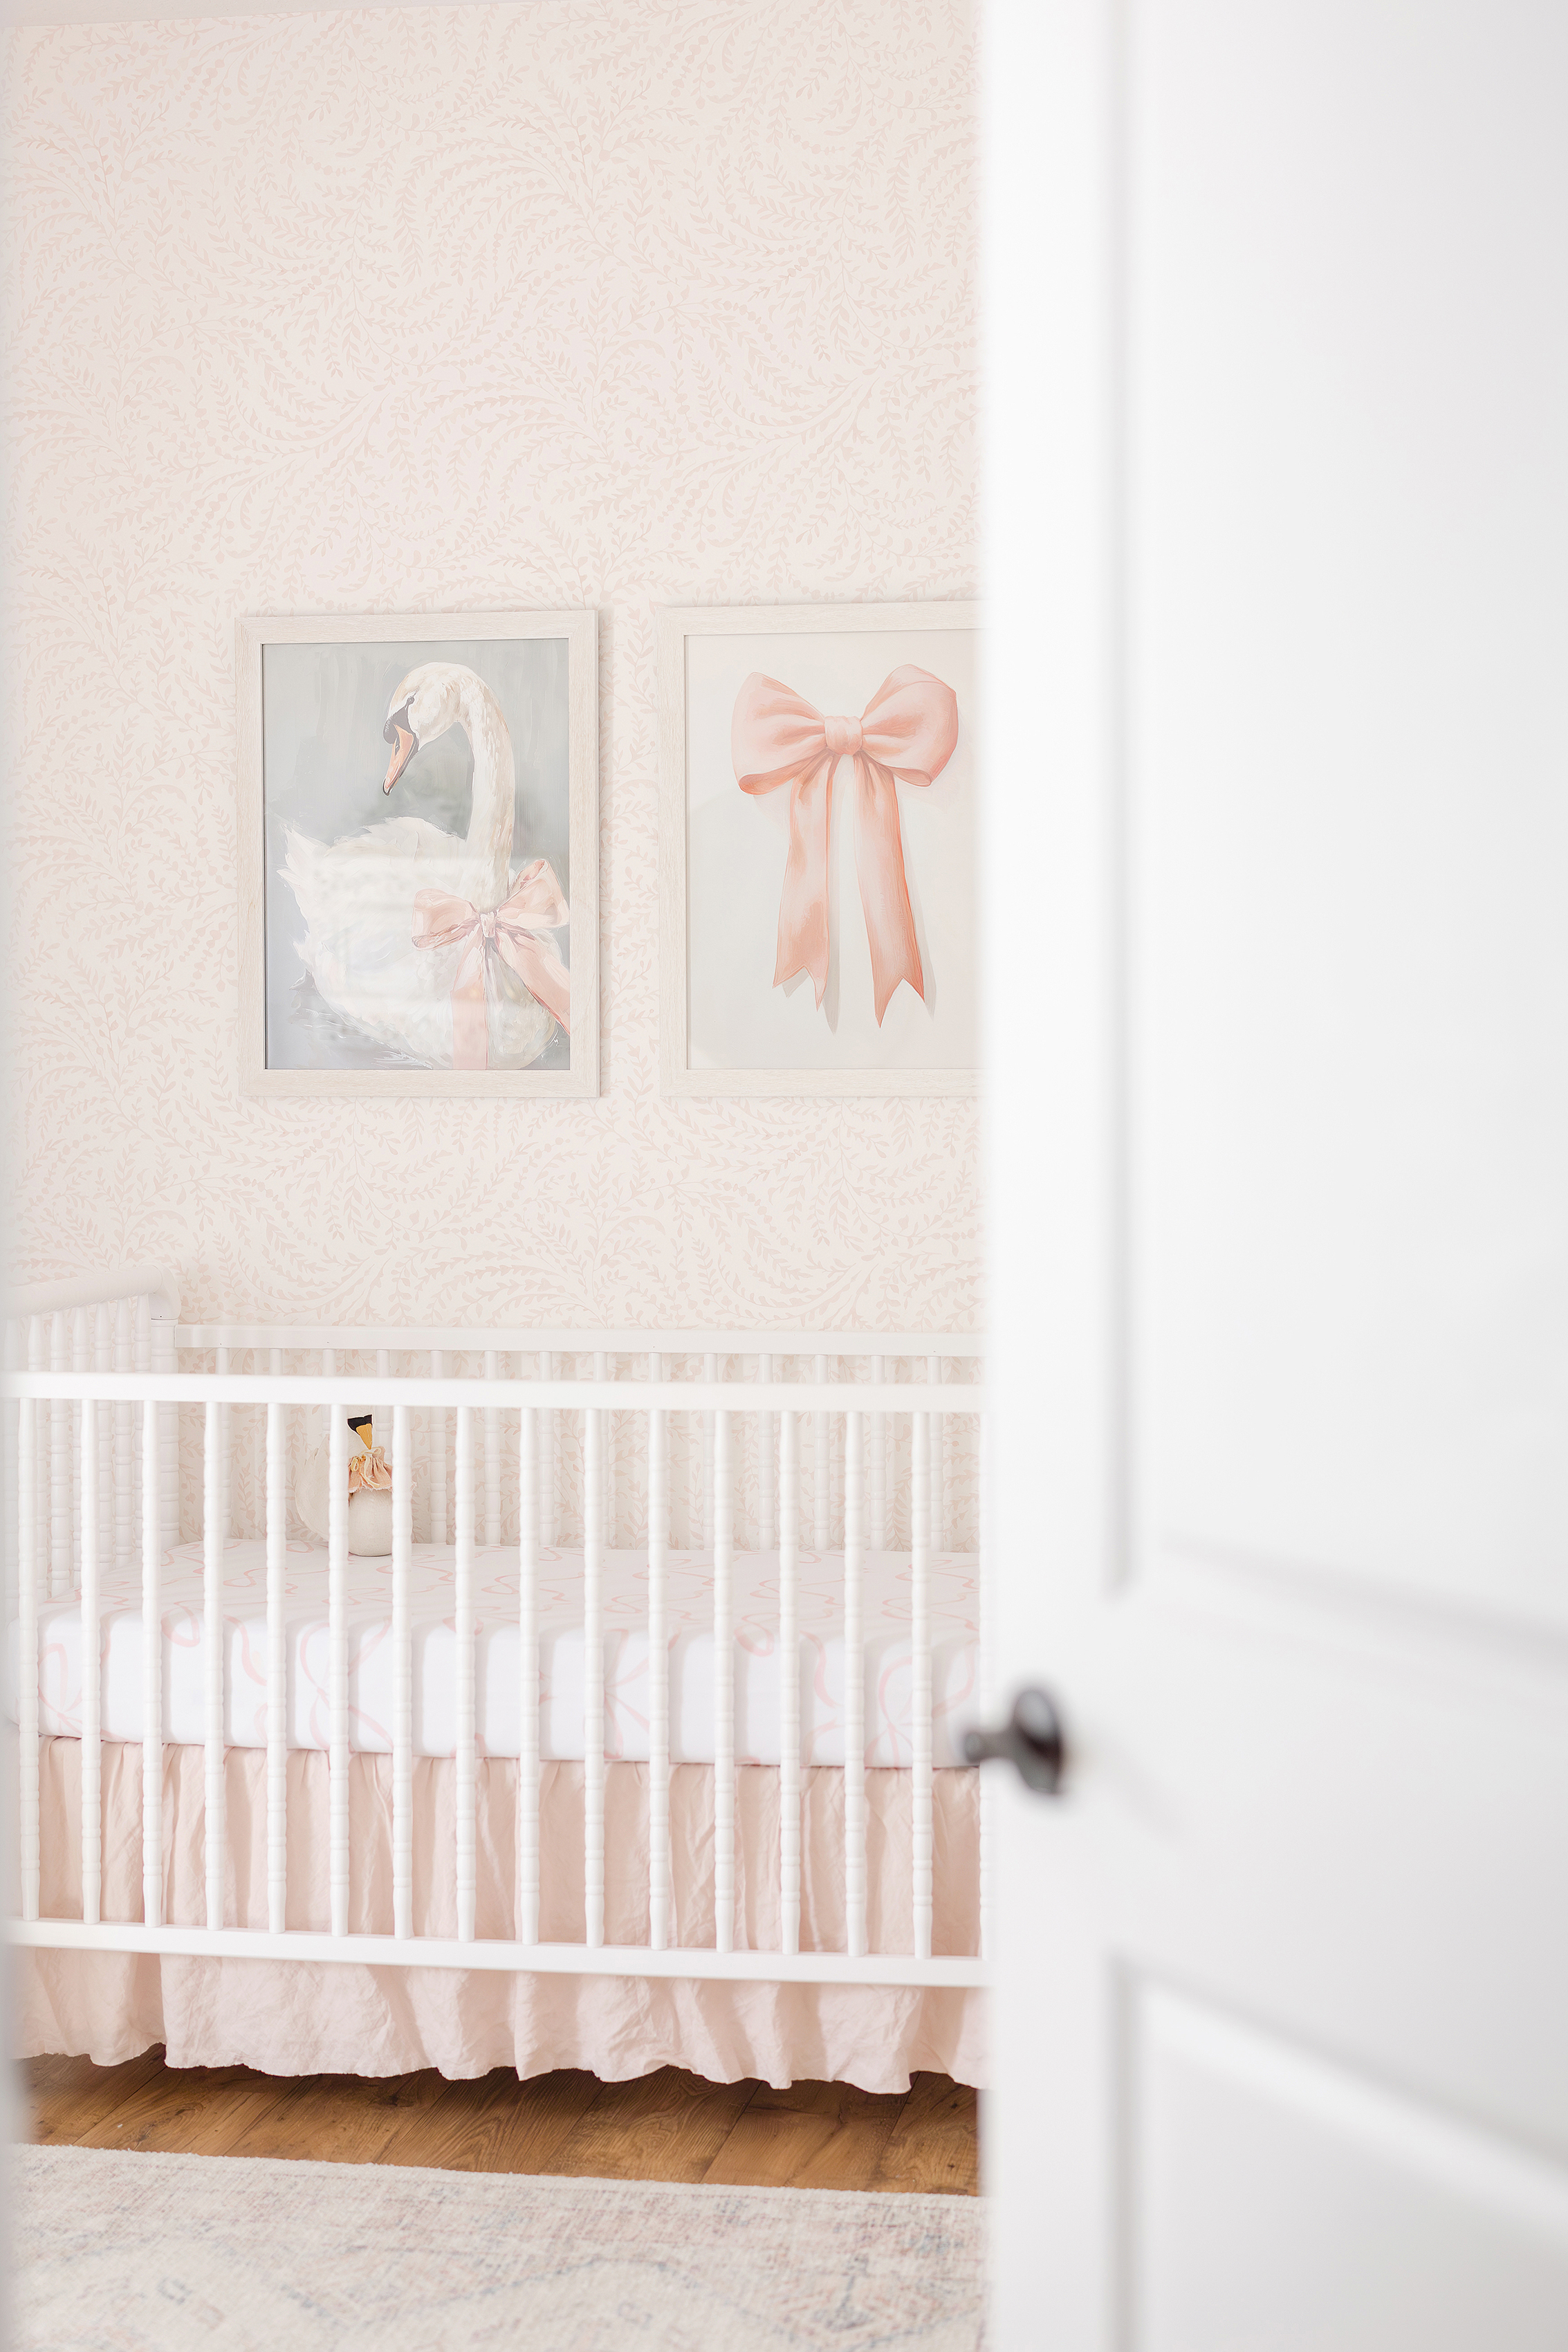 A baby girl's nursery detail shot with pink and white details.